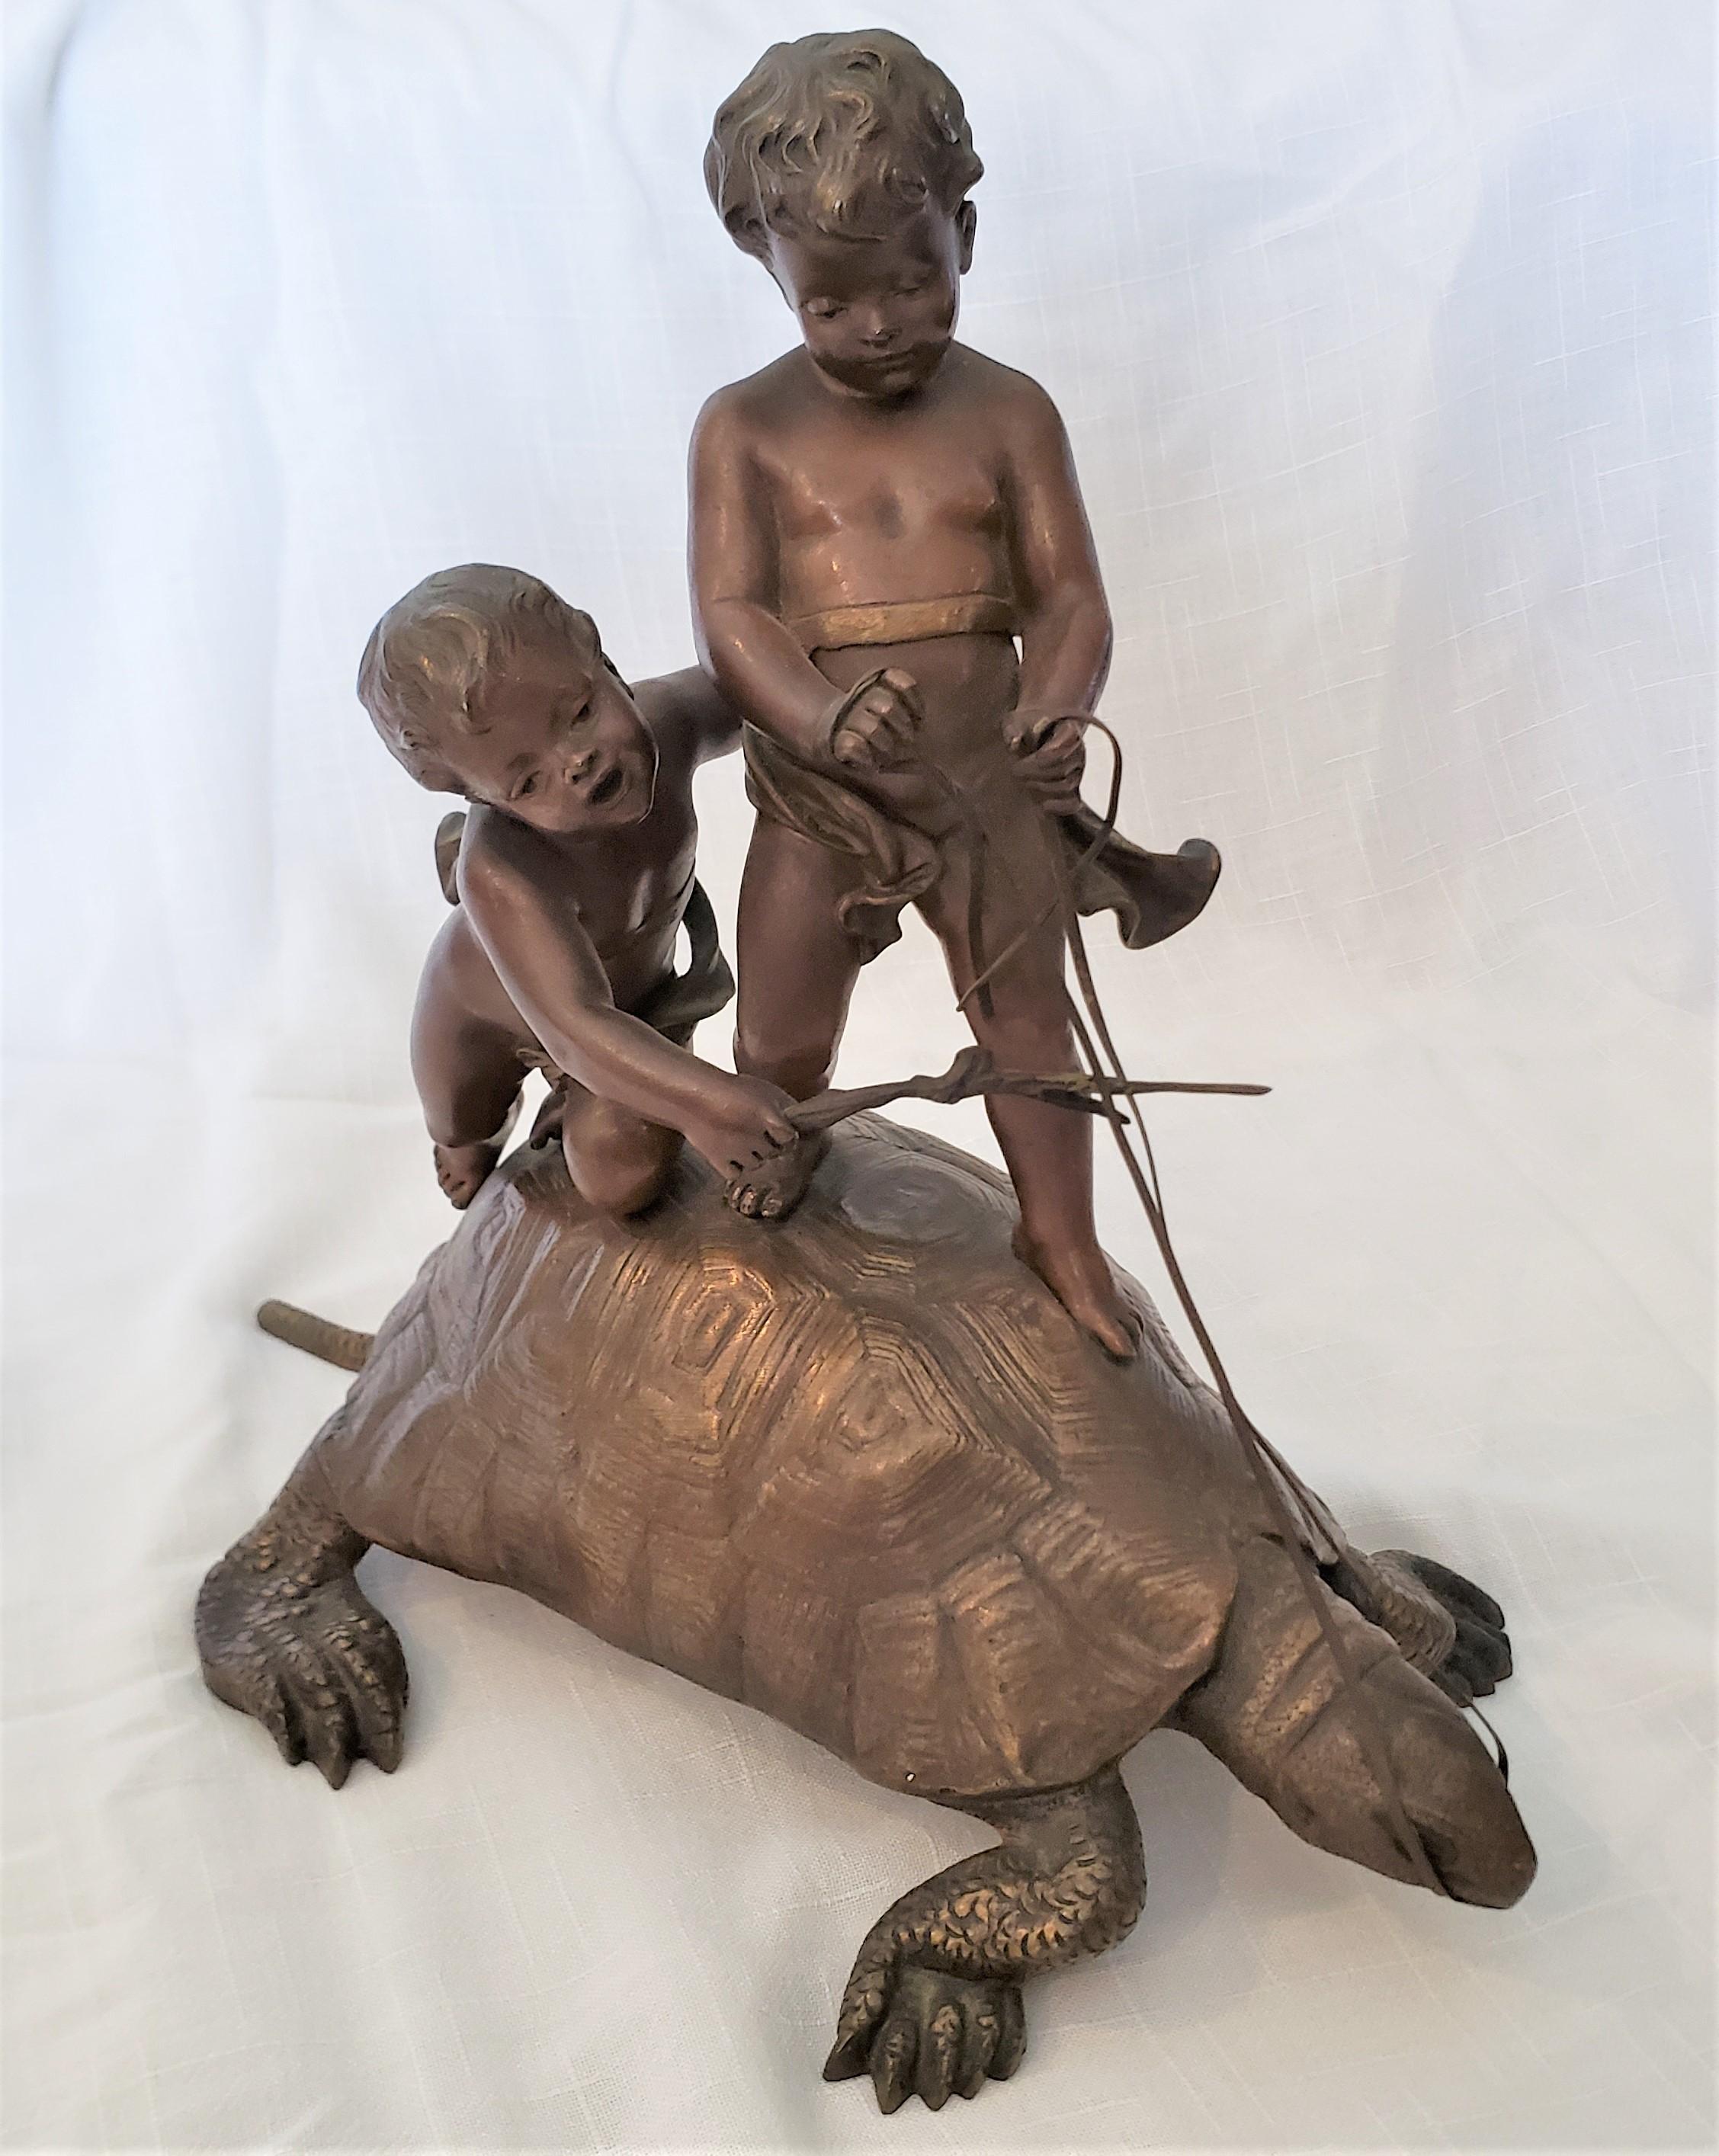 This whimsical antique bronze sculpture was done by Eutrope Bouret of France in approximately 1890 in the period Empire style. This very well executed bronze sculpture depicts two young boys riding on the back of a tortoise and holding the reigns.